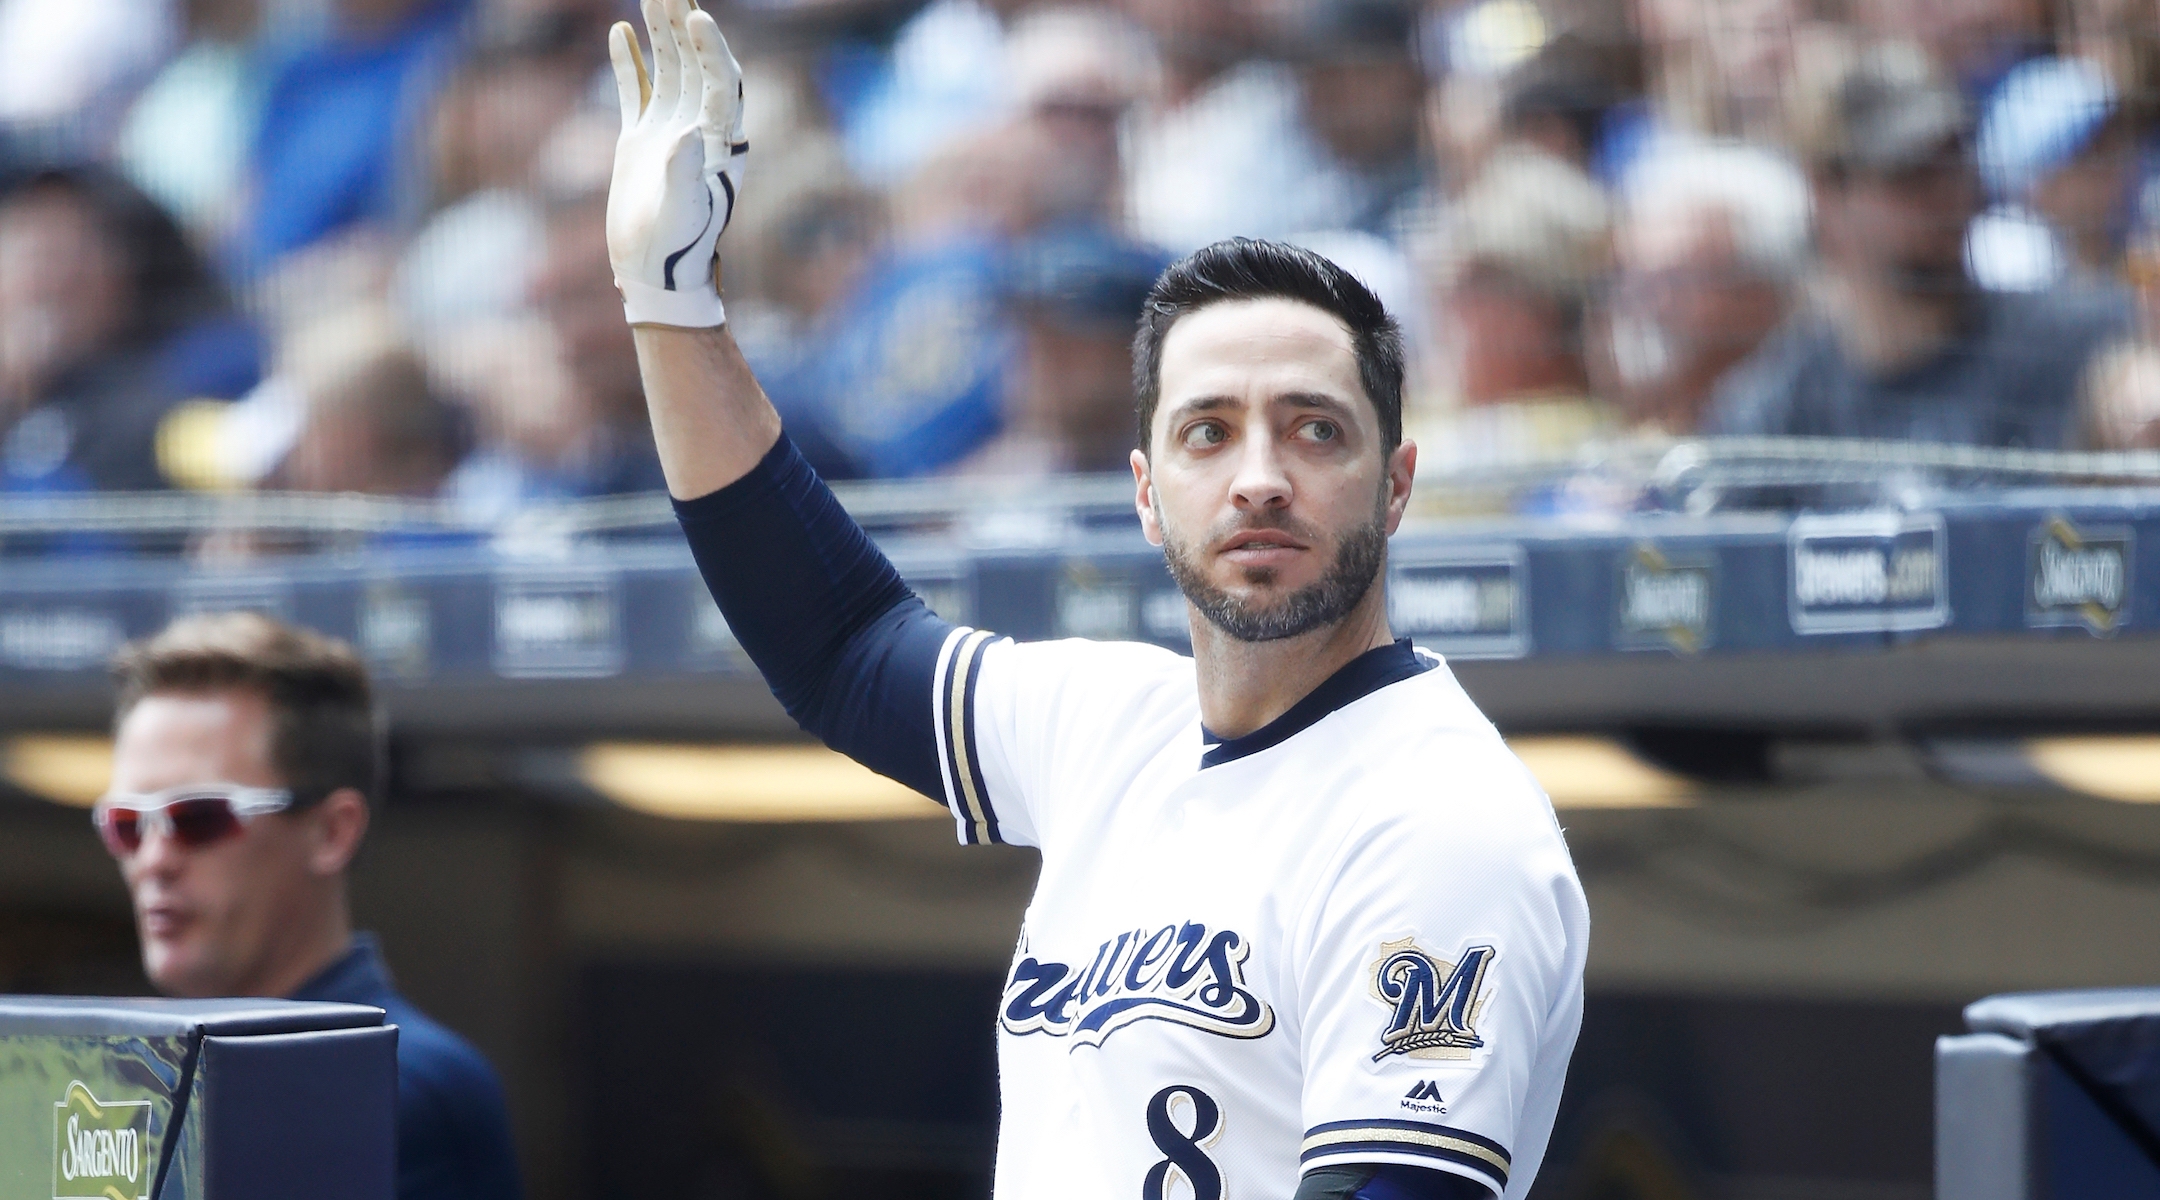 Ryan Braun, former MVP and the all-time Jewish home run hitter, retires  from Major League Baseball - Jewish Telegraphic Agency